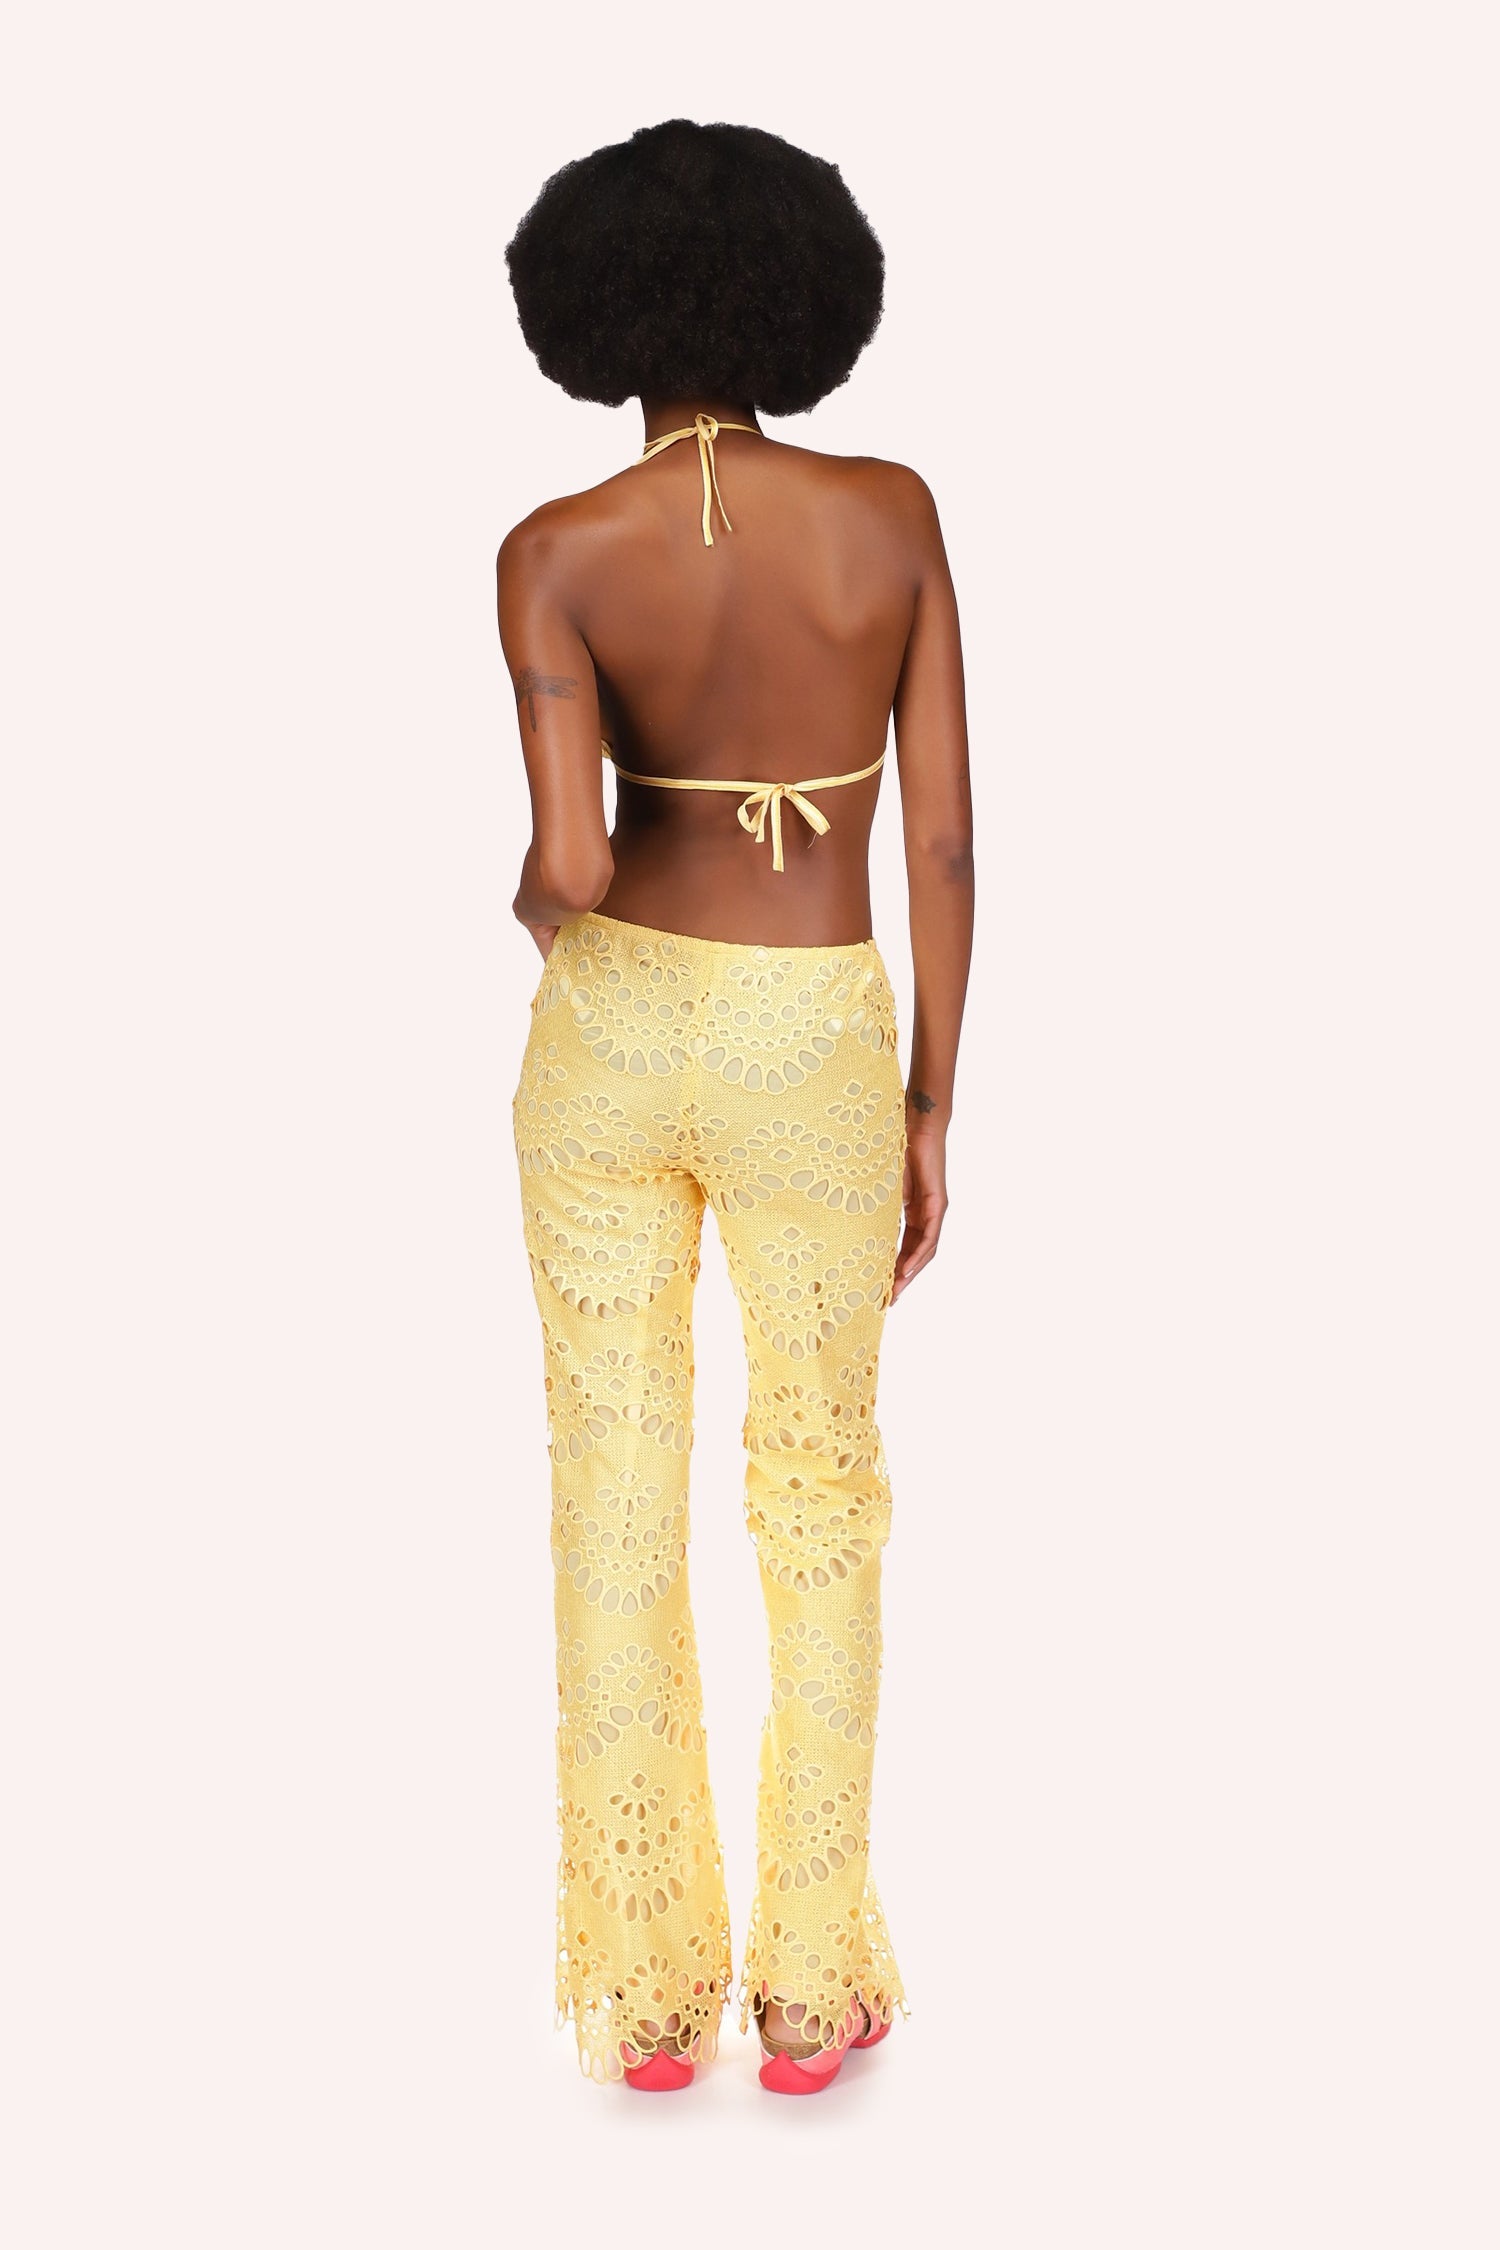 Back of Eyelet Pants yellow with from small to large oval eyelets in a round shaped alignment